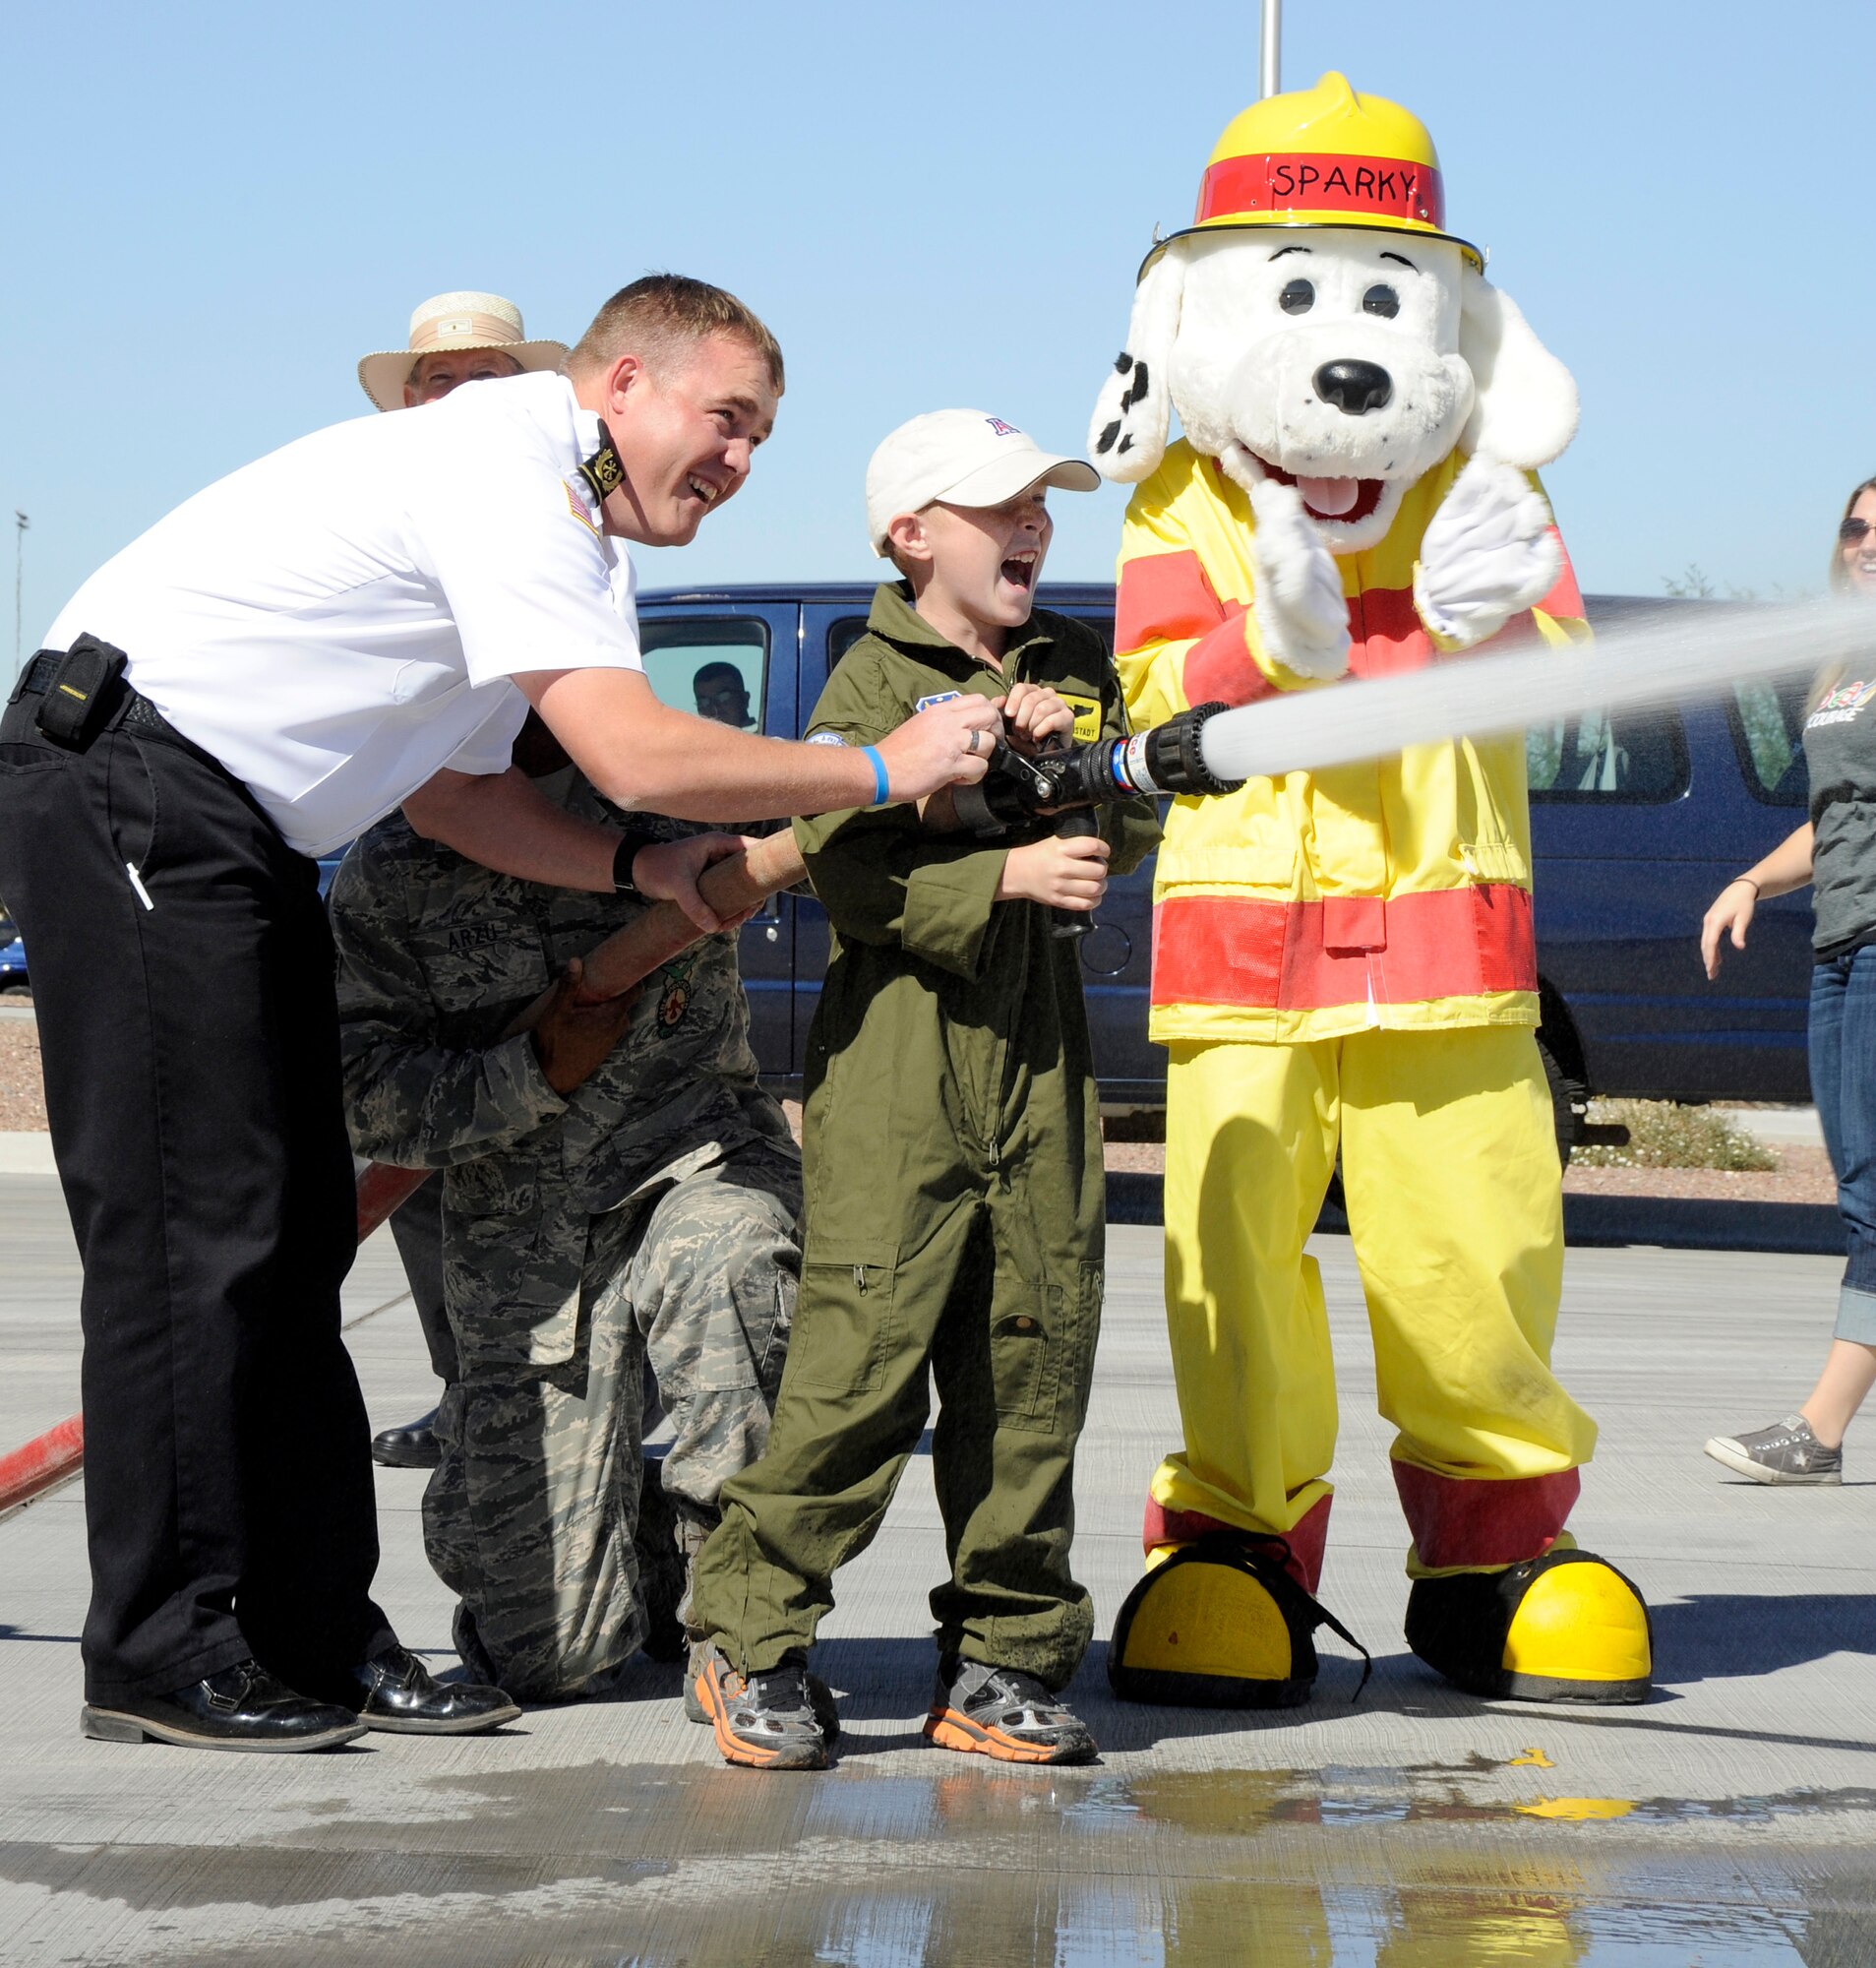 Firefighters from the Davis-Monthan Air Force Base Fire Department assist Larry Ronstadt in spraying a target with the fire hose during the Pilot for a Day event on Oct 25, 2012.  Eight-year-old Larry is the son of Jeff and Tiana Ronstadt, and was diagnosed with acute lymphoblastic leukemia in December 2011. (U.S. Air Force photo by 1LT Susan Harrington/released)